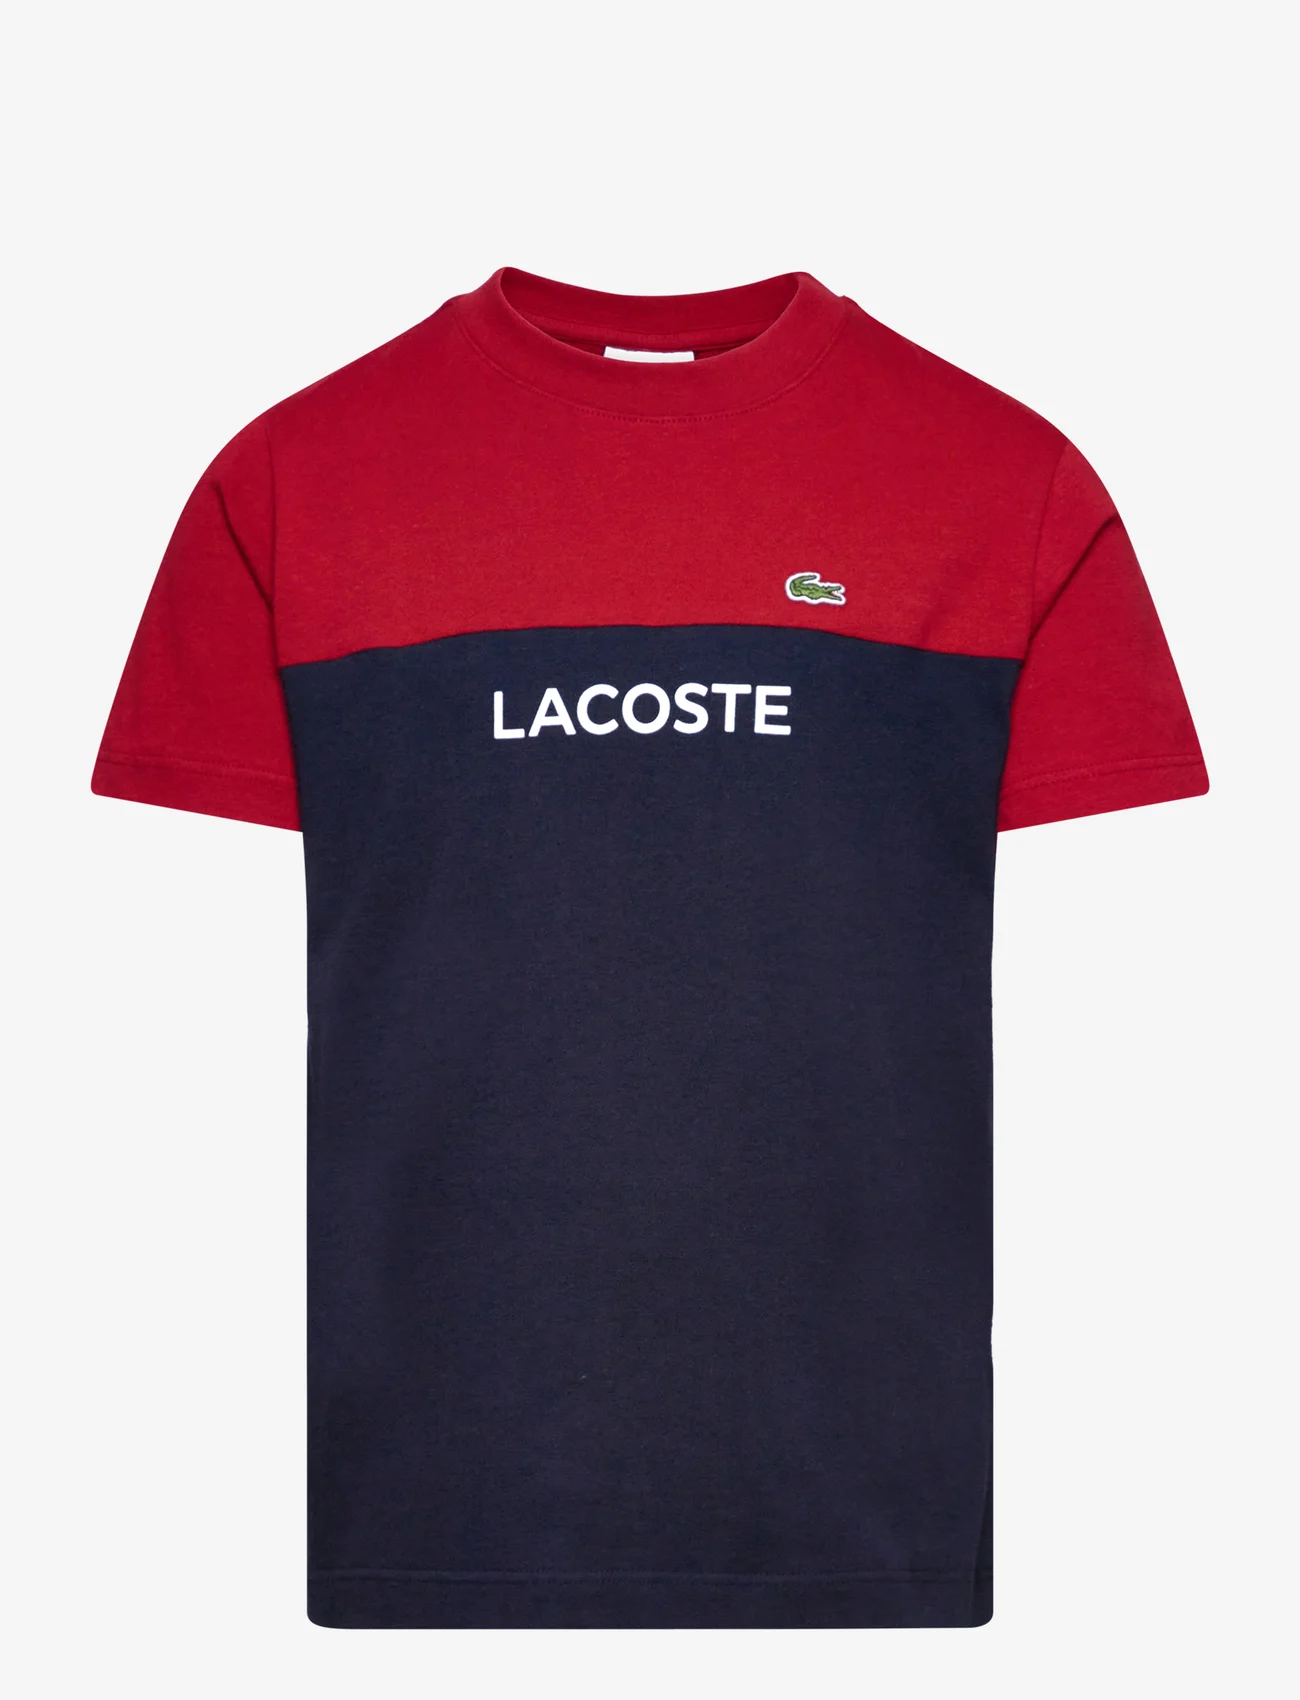 Lacoste - TEE-SHIRT&TURTLE - short-sleeved t-shirts - ora/navy blue - 0